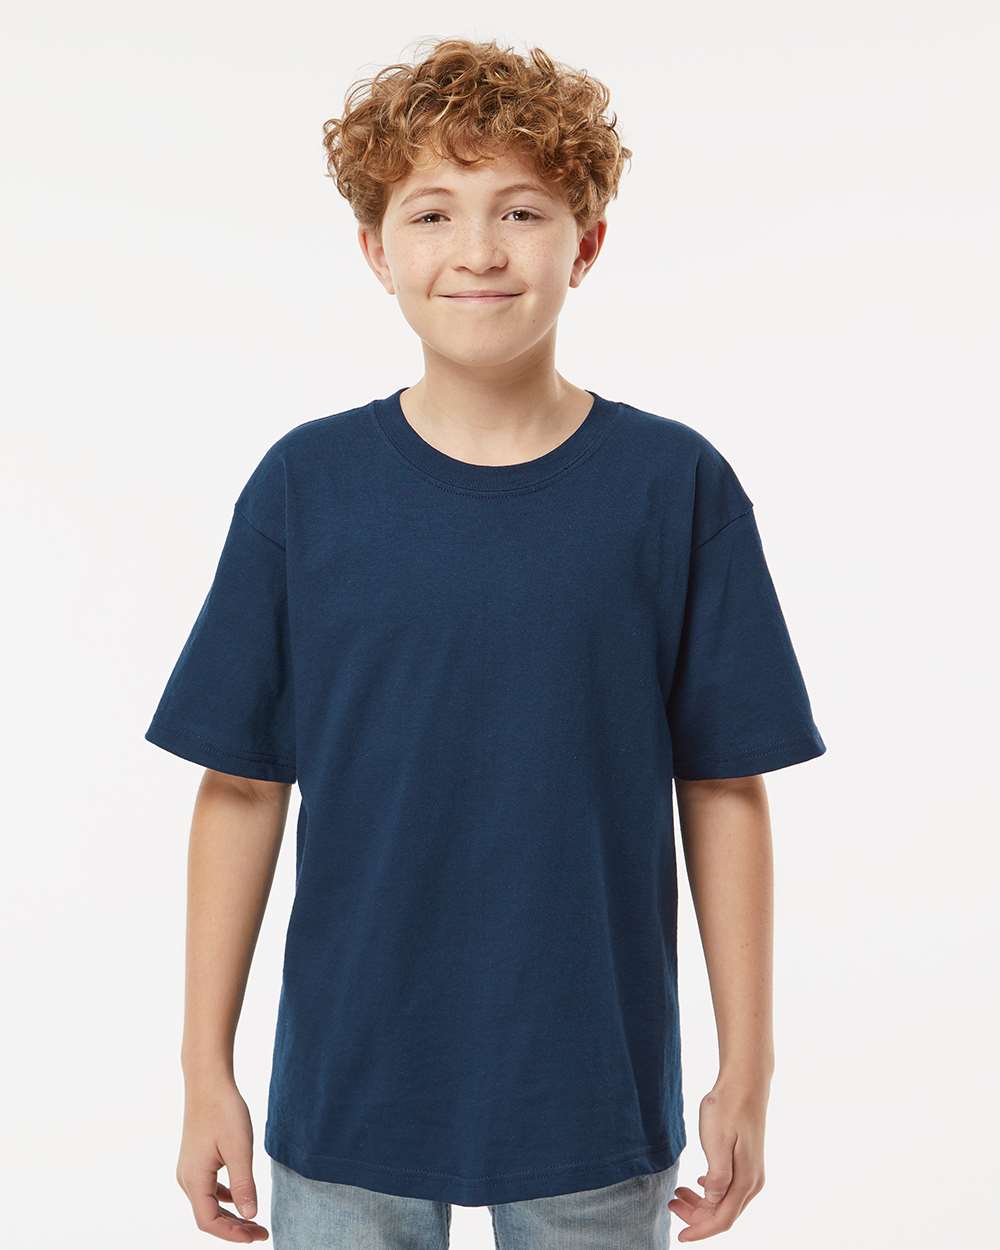 M&O Youth Gold Soft Touch T-Shirt 4850 #colormdl_Deep Navy